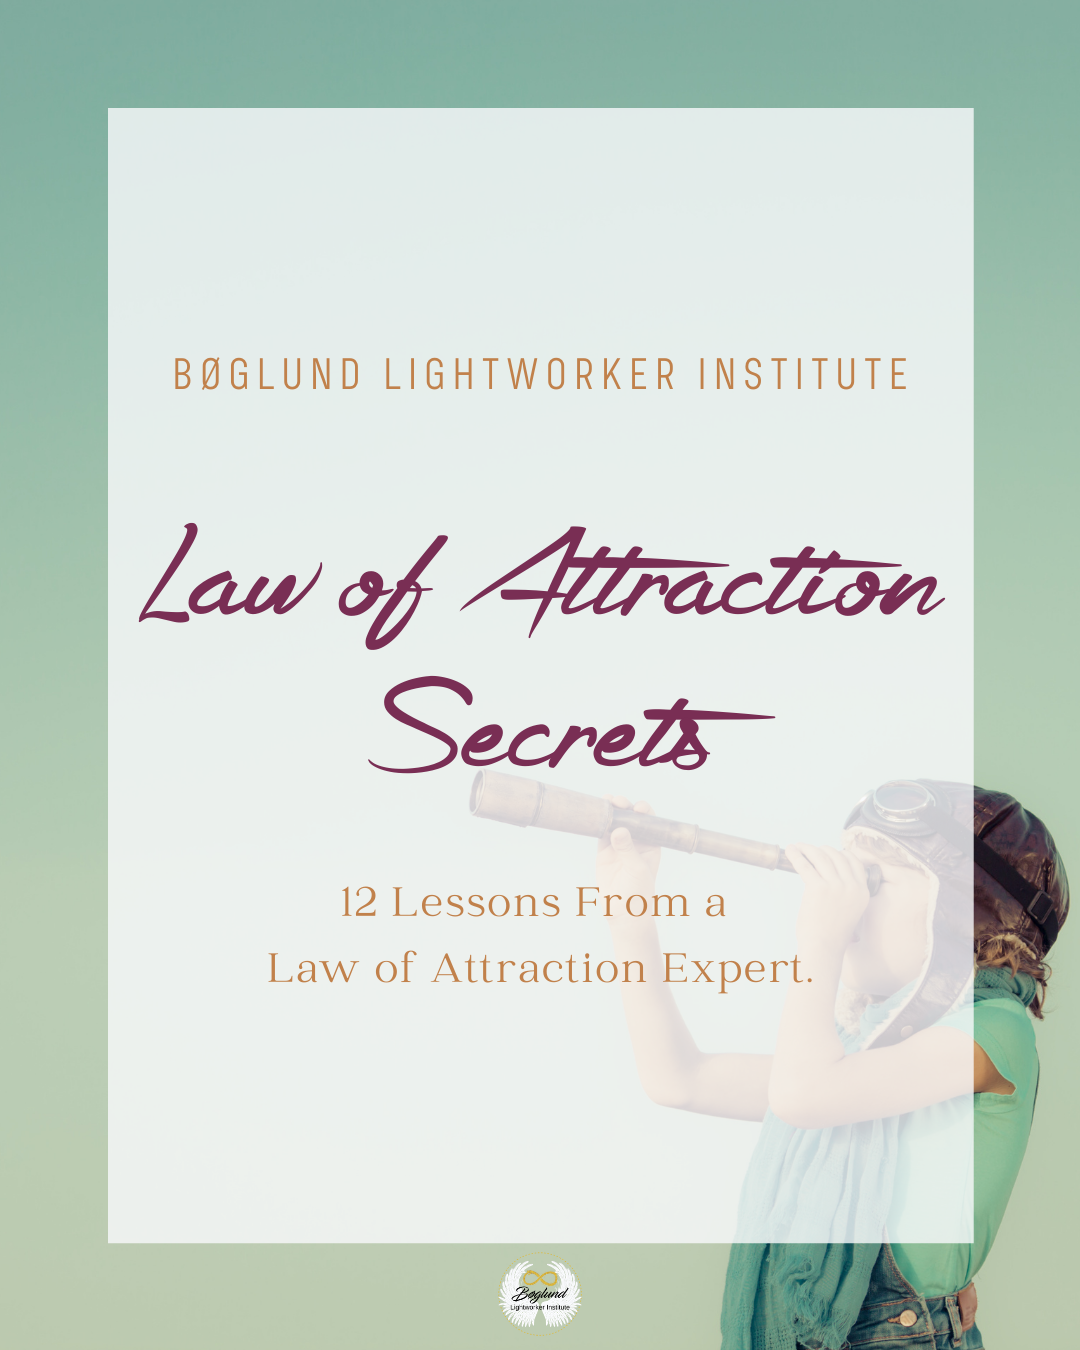 12 Lessons From a Law of Attraction Expert.